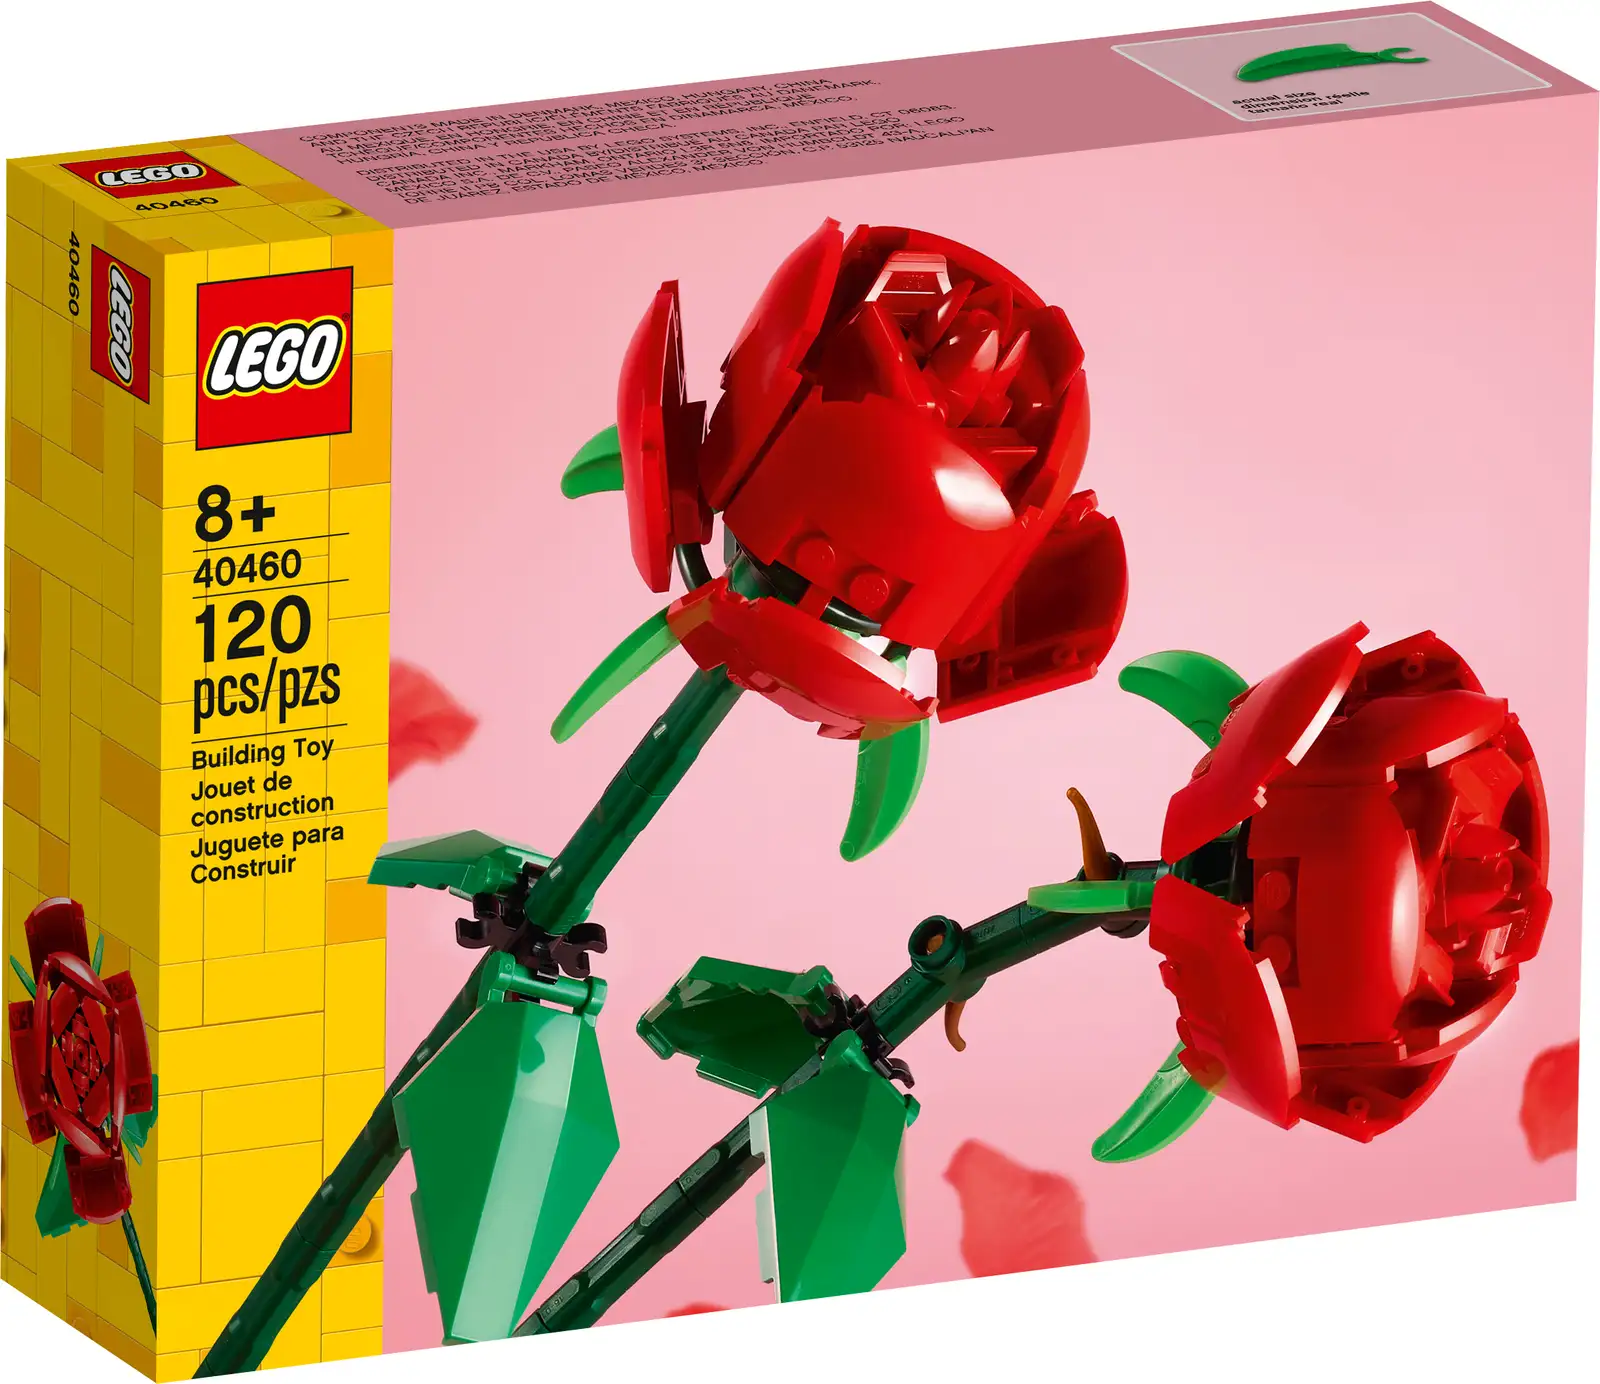 Mark a special occasion with these LEGO® Roses (40460). They’re the perfect gift for Valentine’s Day, Mother’s Day or just to let someone know how much they’re cherished – and they’ll bring a beautiful burst of color when displayed in a vase. This easy-to-assemble set comes with 2 red blooms, green leaves and length-adjustable stems. Combine with LEGO Tulips (40461) to add extra color to this brick-built bouquet. The set is also compatible with the LEGO Flower Bouquet (10280). Show someone how special they are with this LEGO® Roses (40460) building kit. It makes the perfect Valentine’s, Mother’s Day or just-because gift. Includes 2 buildable red roses with adjustable stems. Each rose stem measures over 10 in. (26 cm) long – perfect for displaying in a vase.